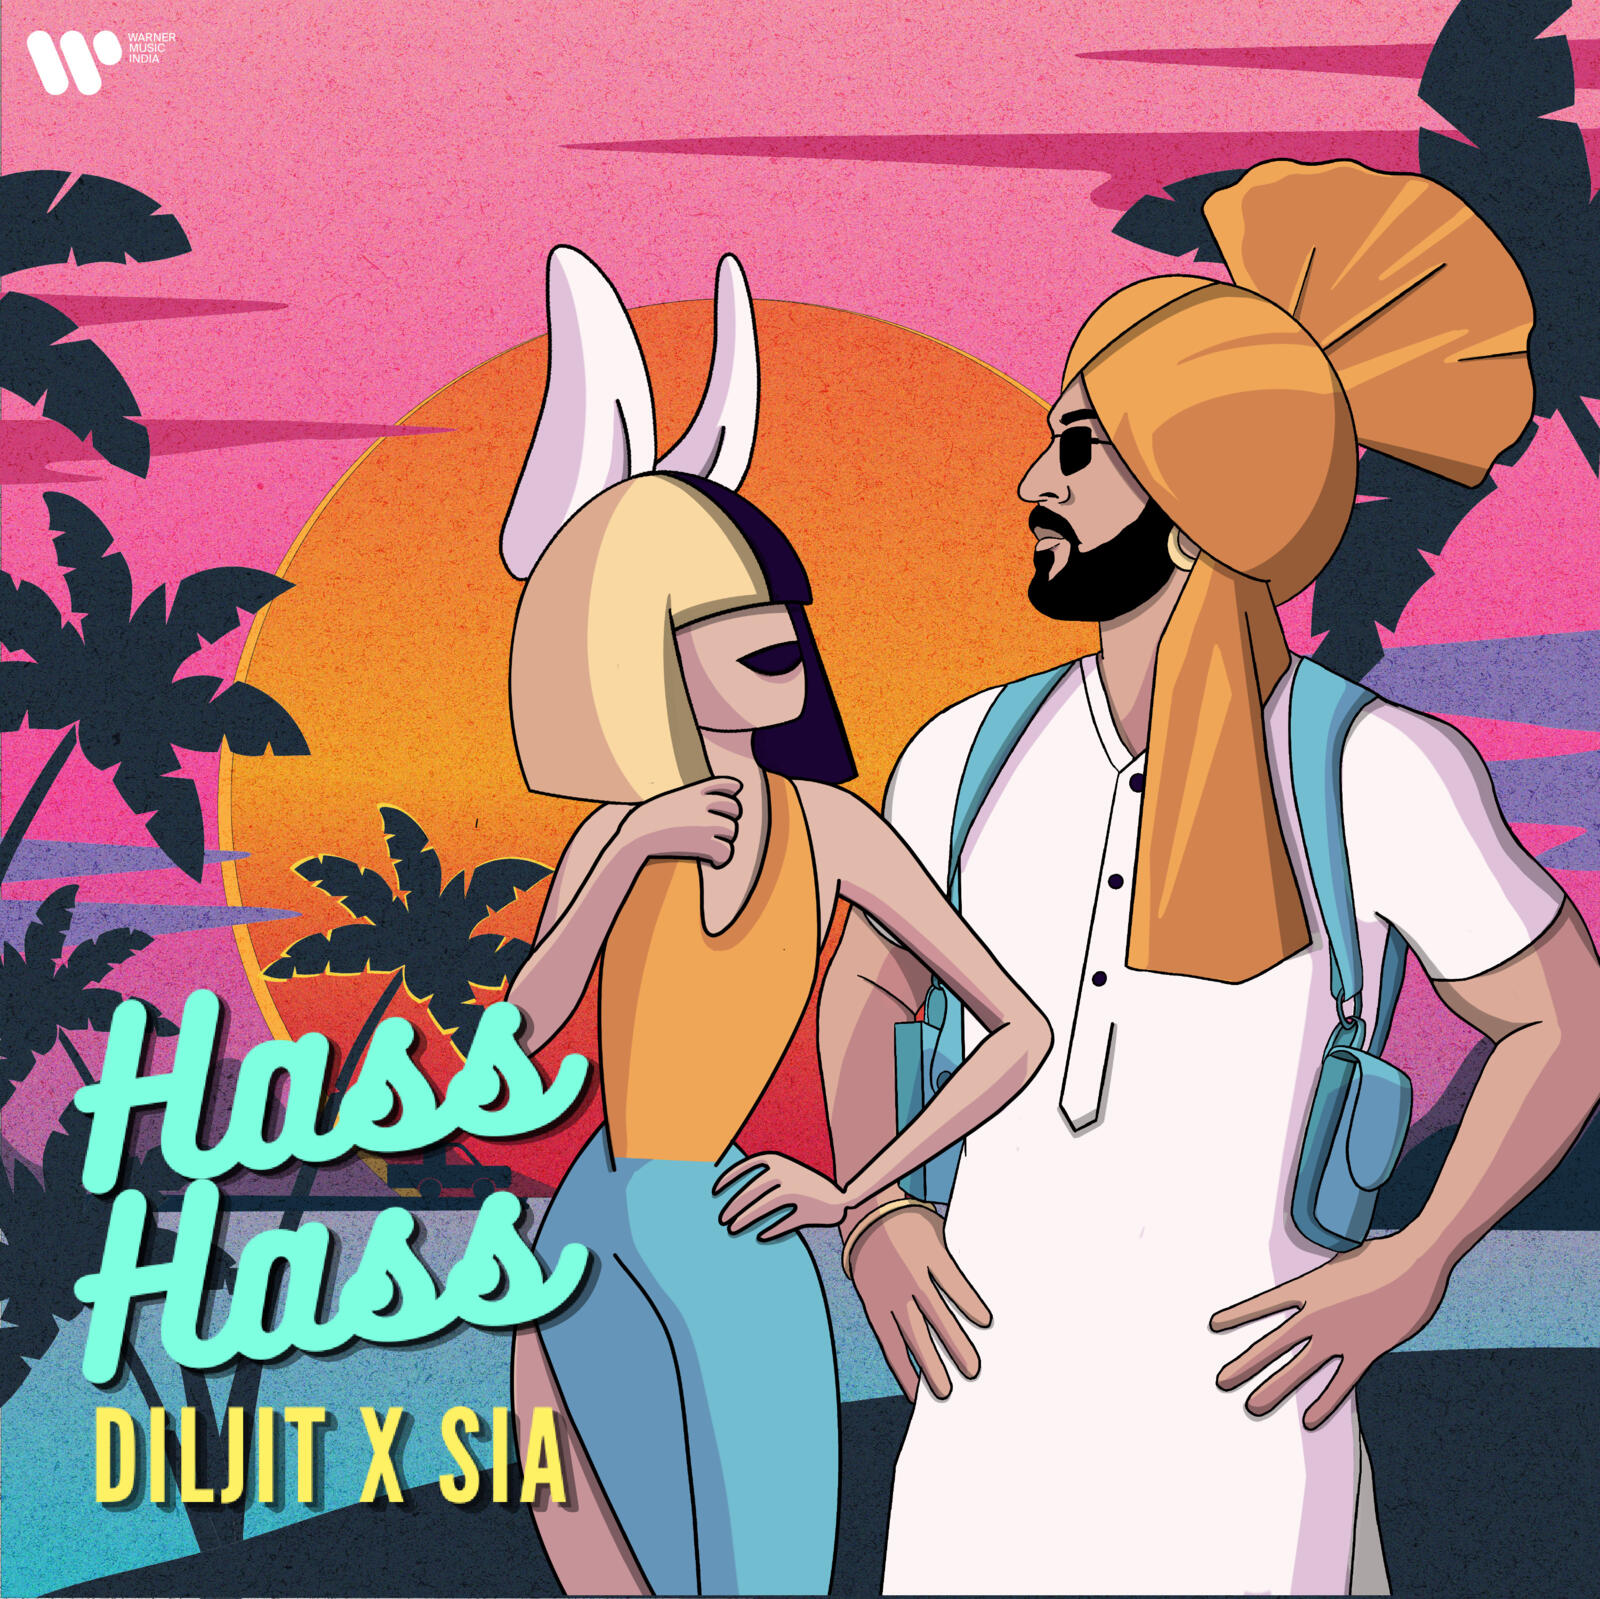 You are currently viewing SuperNova: Diljit Dosanjh & Sia – Hass Hass (18.12)